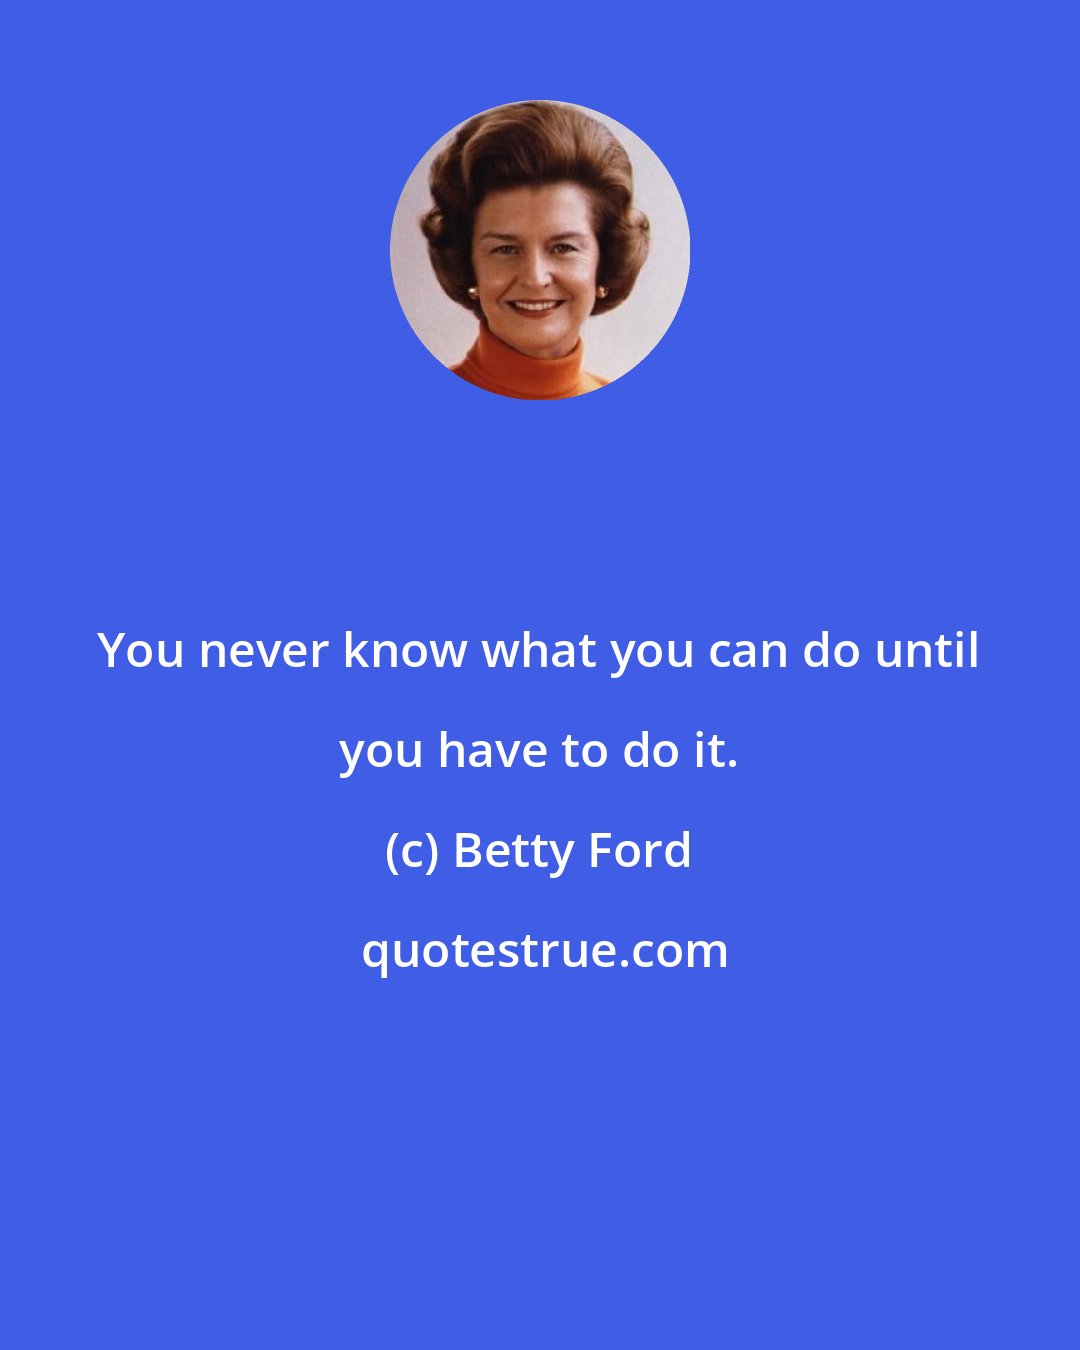 Betty Ford: You never know what you can do until you have to do it.